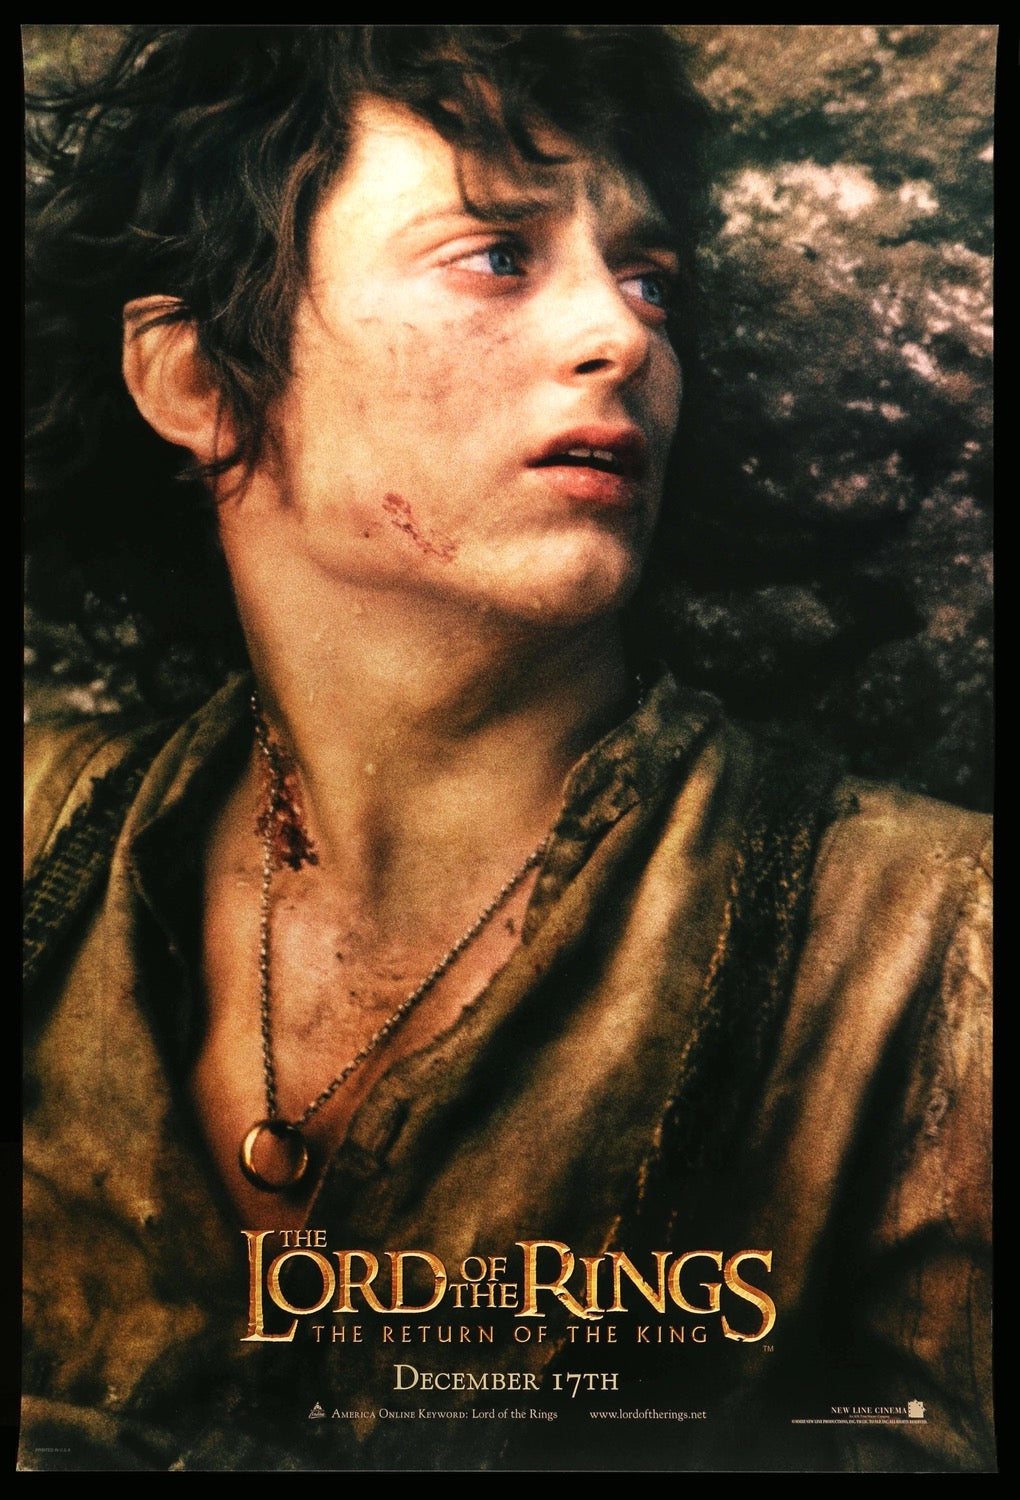 Lord of the Rings: The Return of the King (2003) original movie poster for sale at Original Film Art